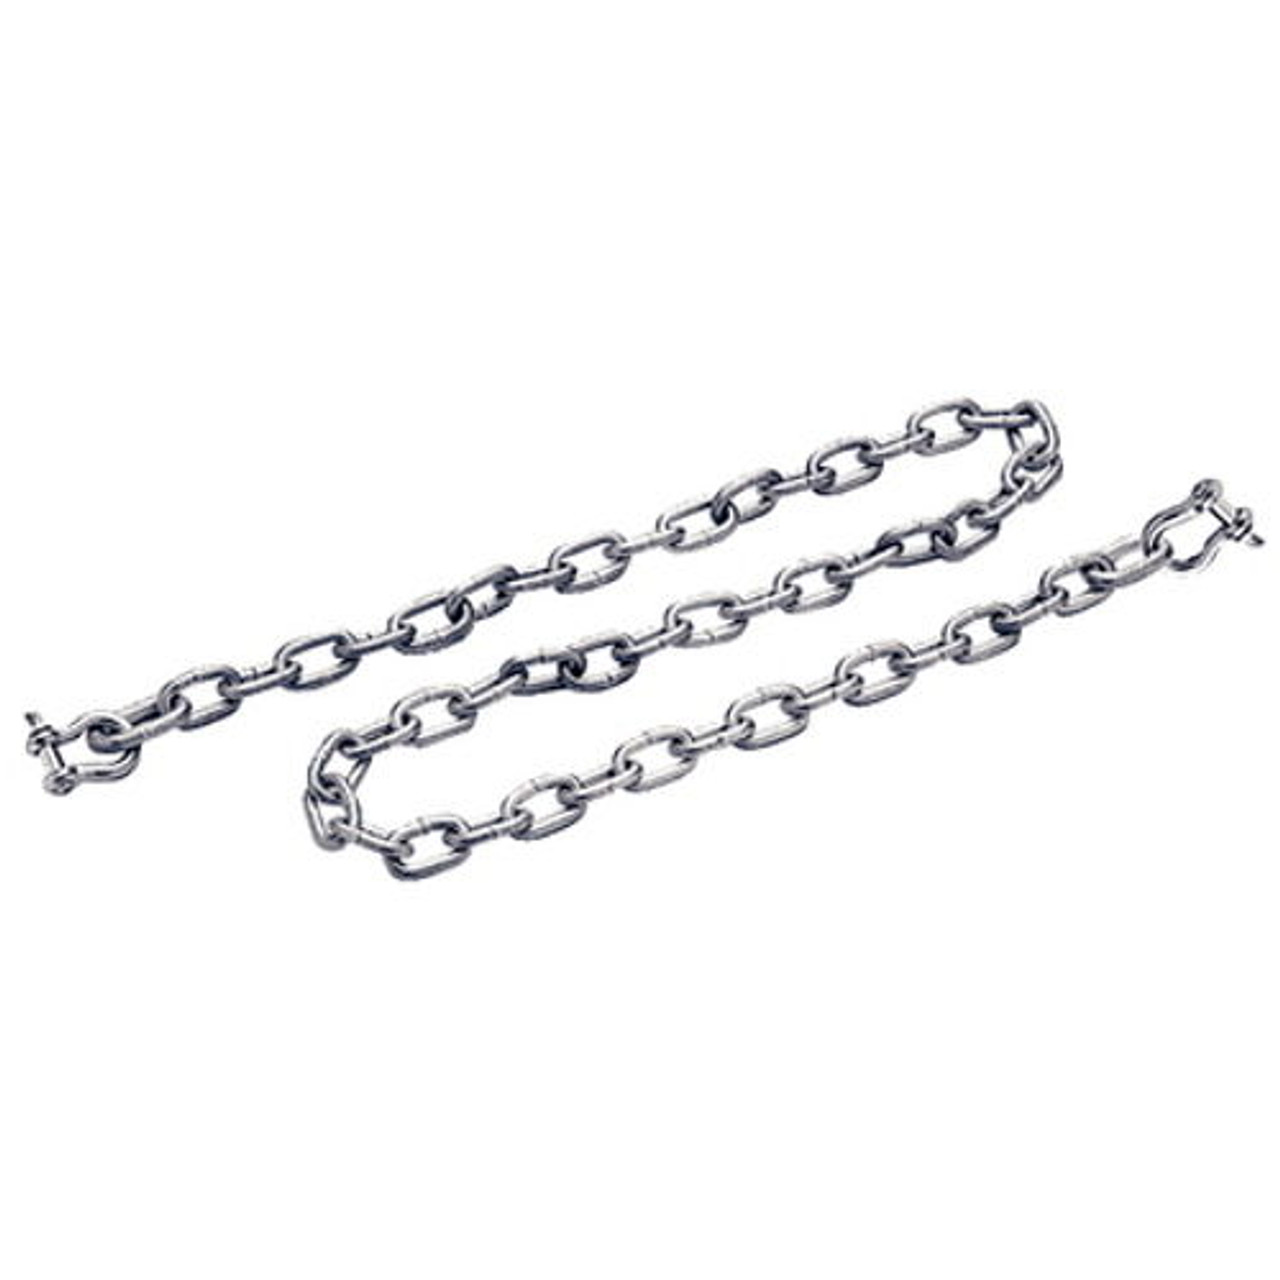 1/4 Inch x 4 Ft Galvanized Anchor Lead Chain with 5/16 Inch Shackles for Boats